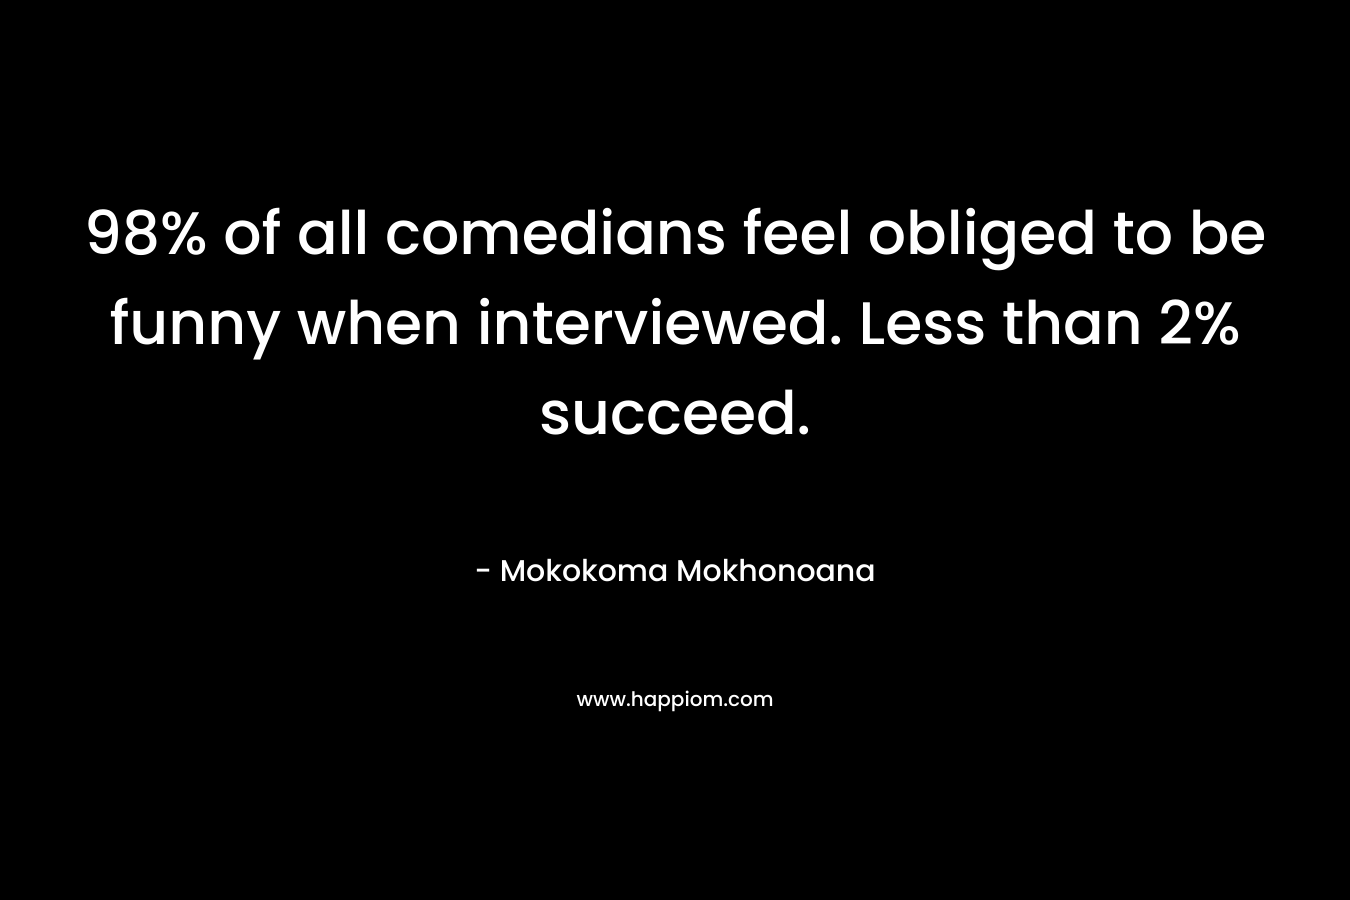 98% of all comedians feel obliged to be funny when interviewed. Less than 2% succeed. – Mokokoma Mokhonoana